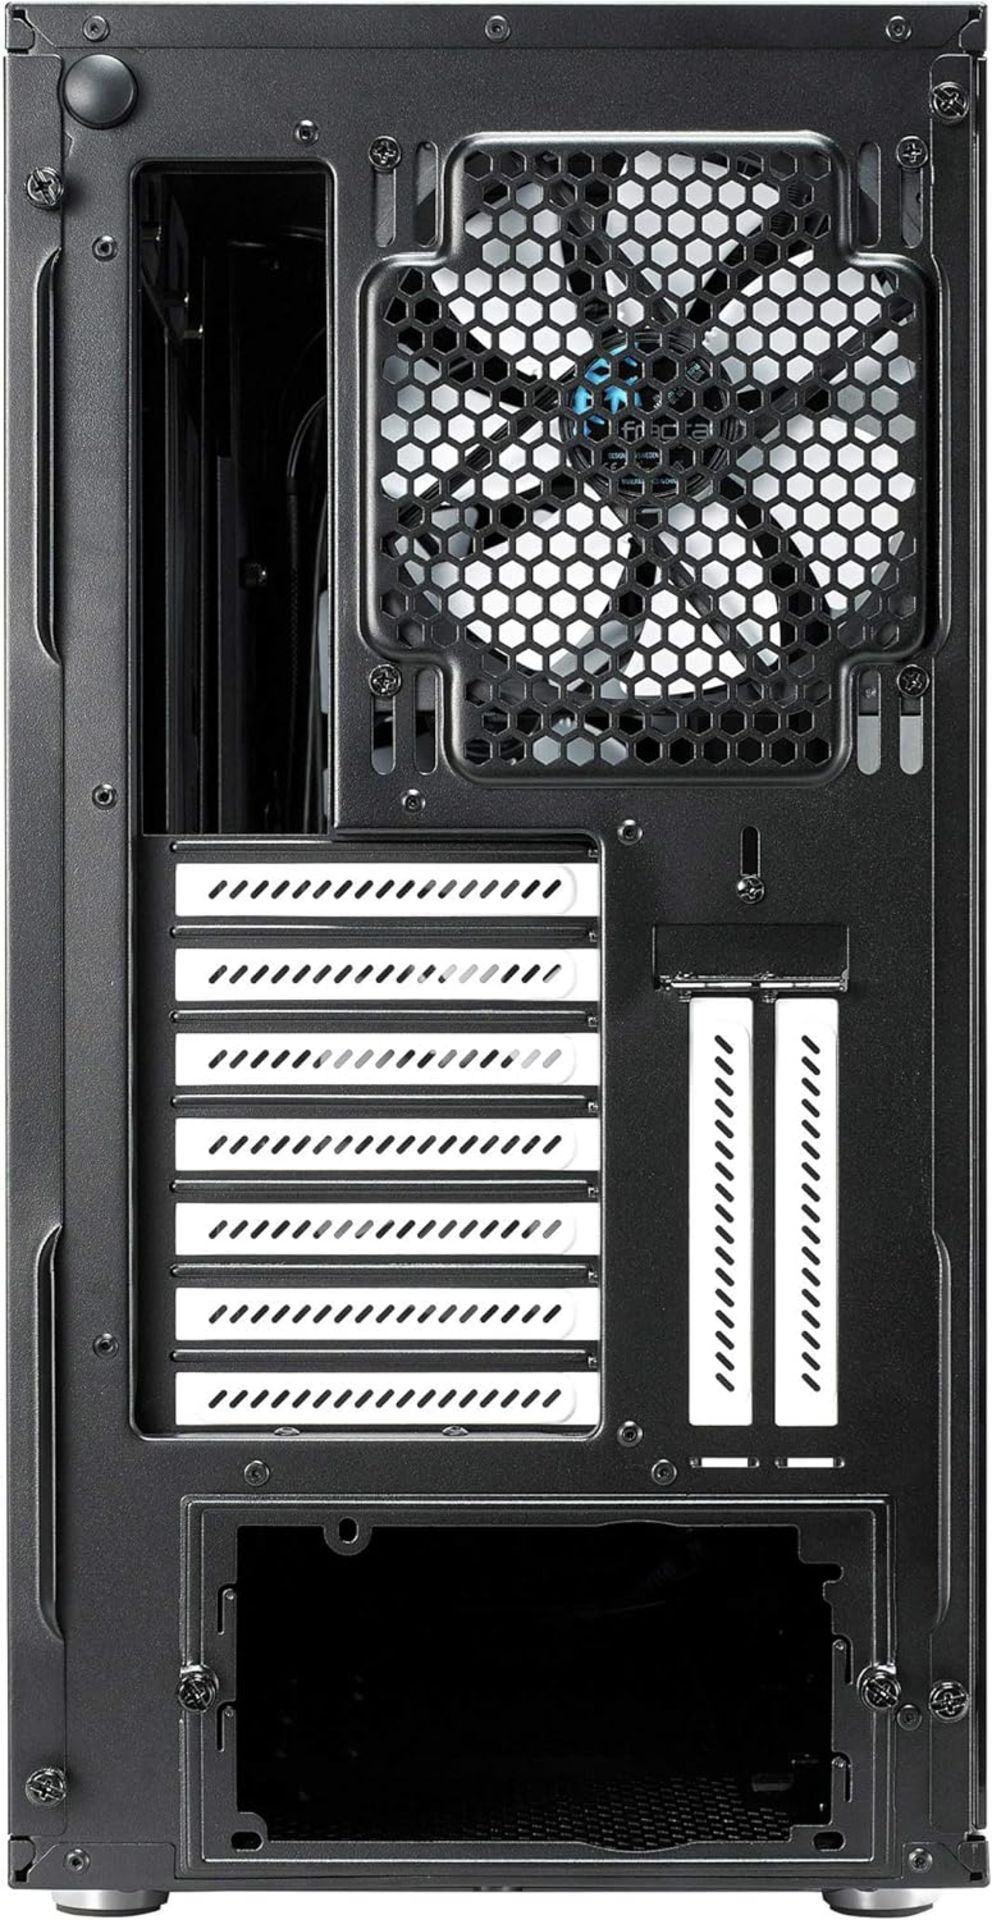 NEW & BOXED FRACTAL DESIGN Define R6 Mid Tower ATX Computer Case- BLACK. RRP £161.94. (R6-7). - Image 4 of 8